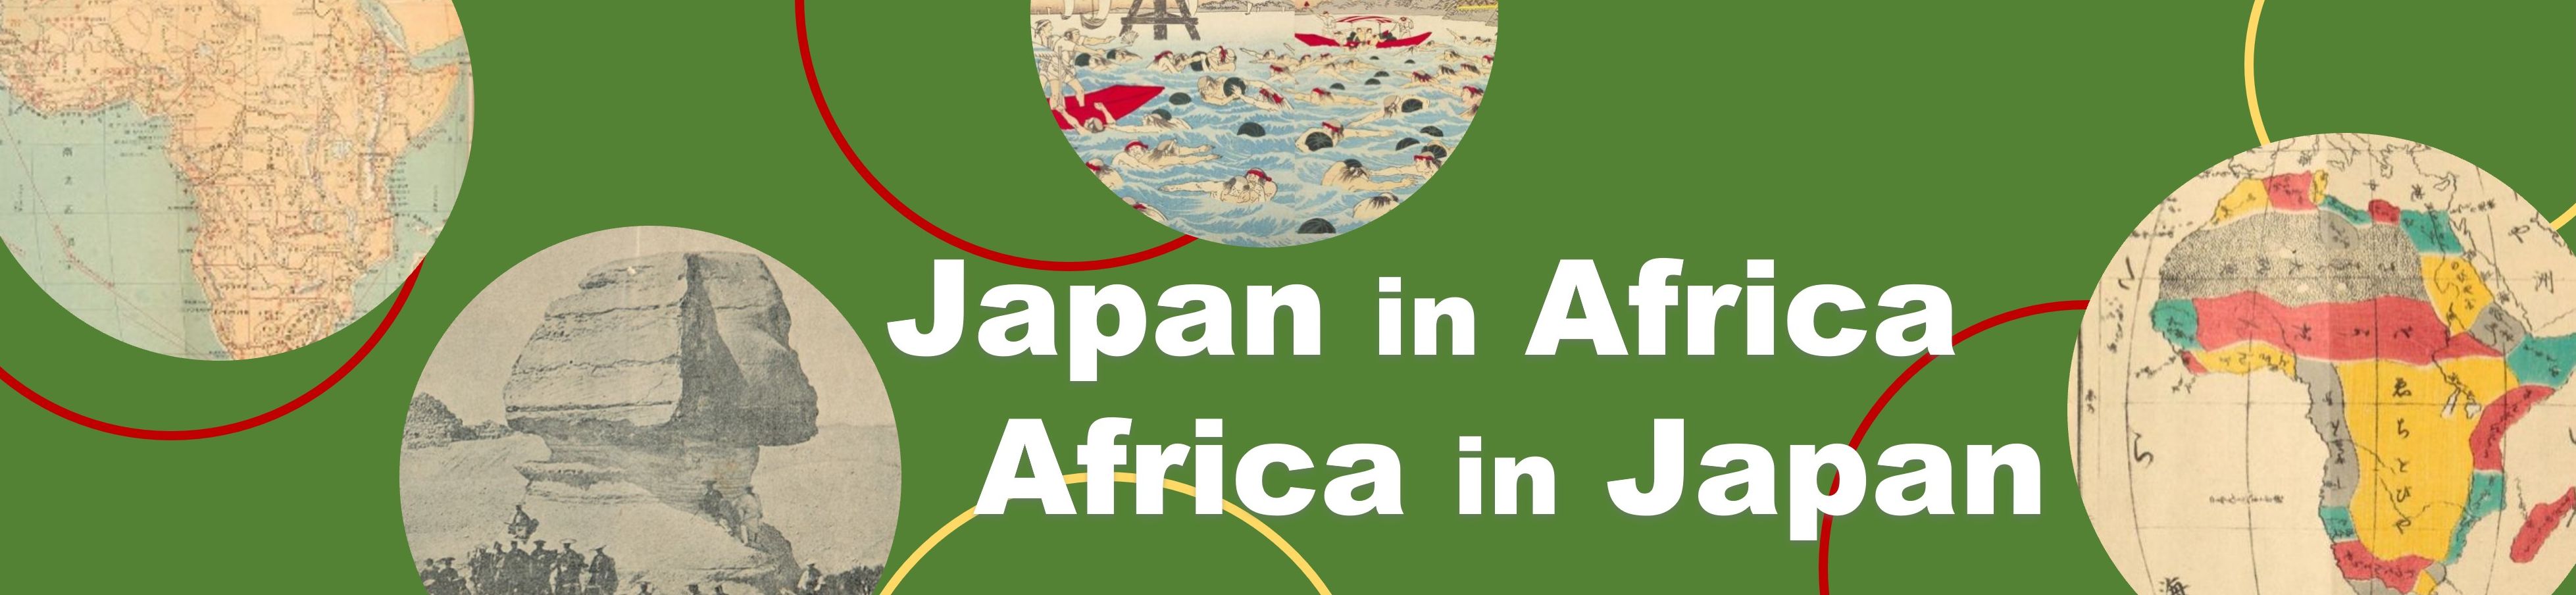 Japan in Africa, Africa in Japan - Exchanges of Culture and People